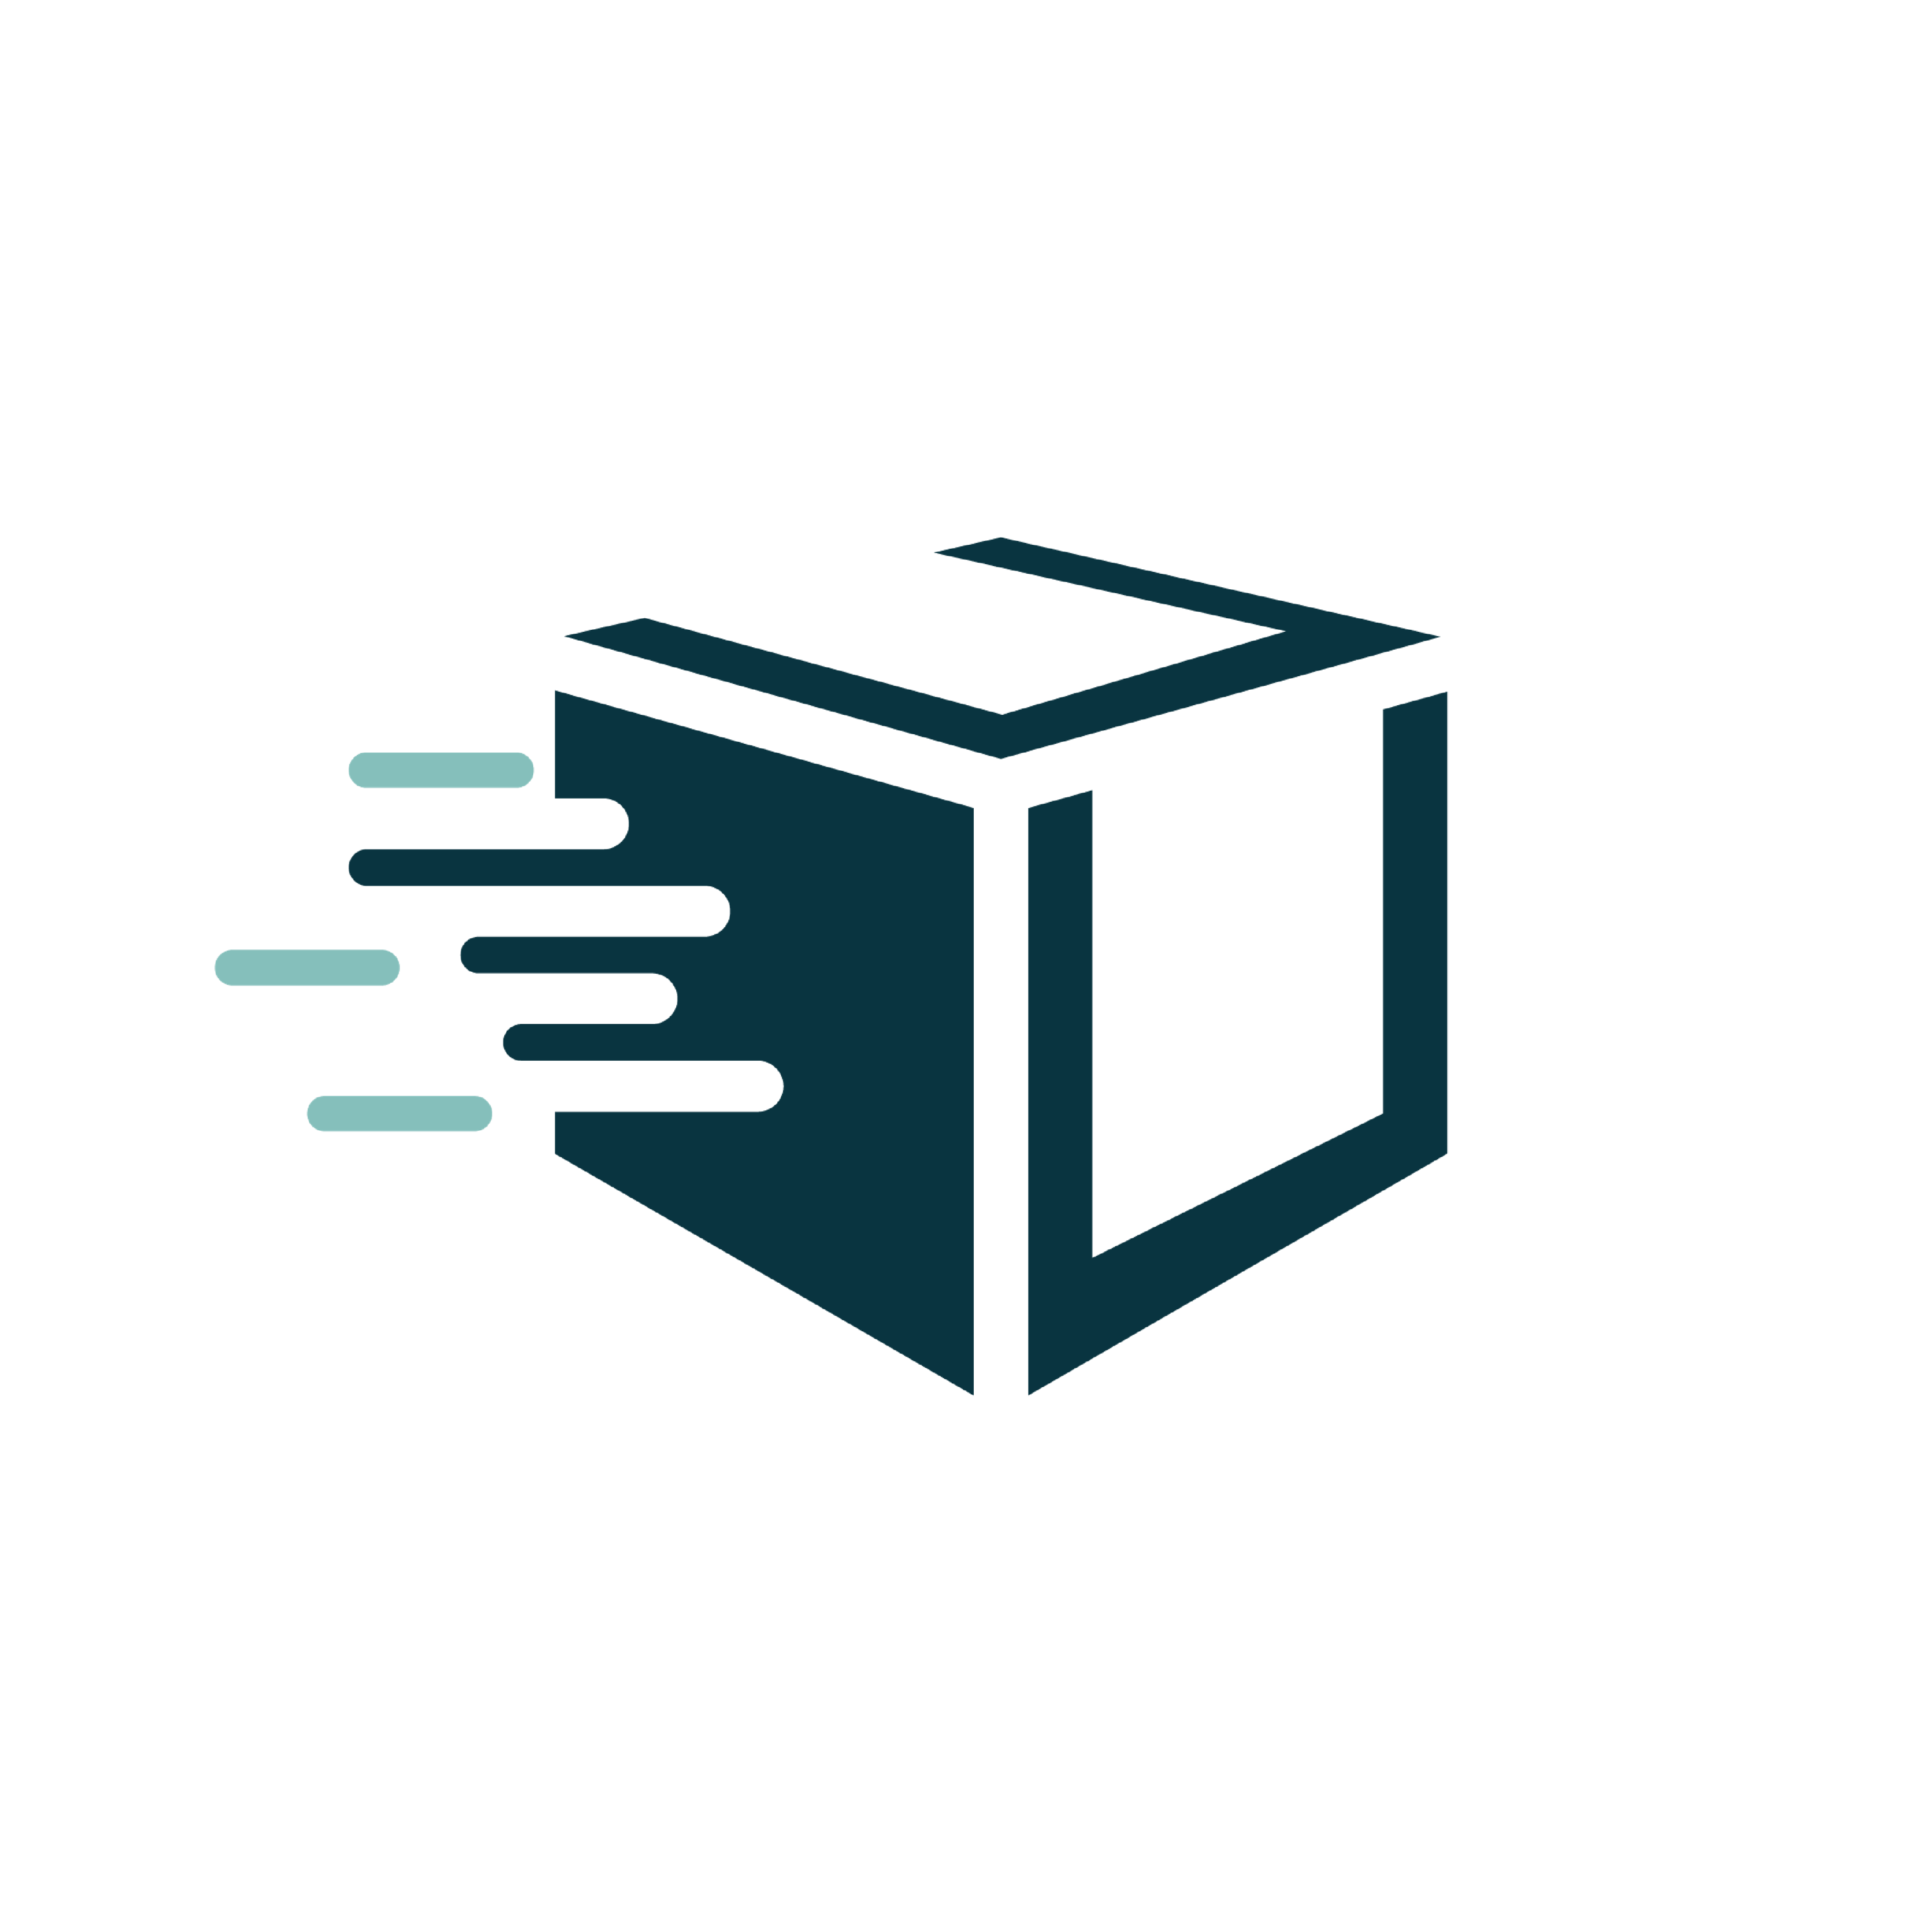 Fast moving shipping box icon